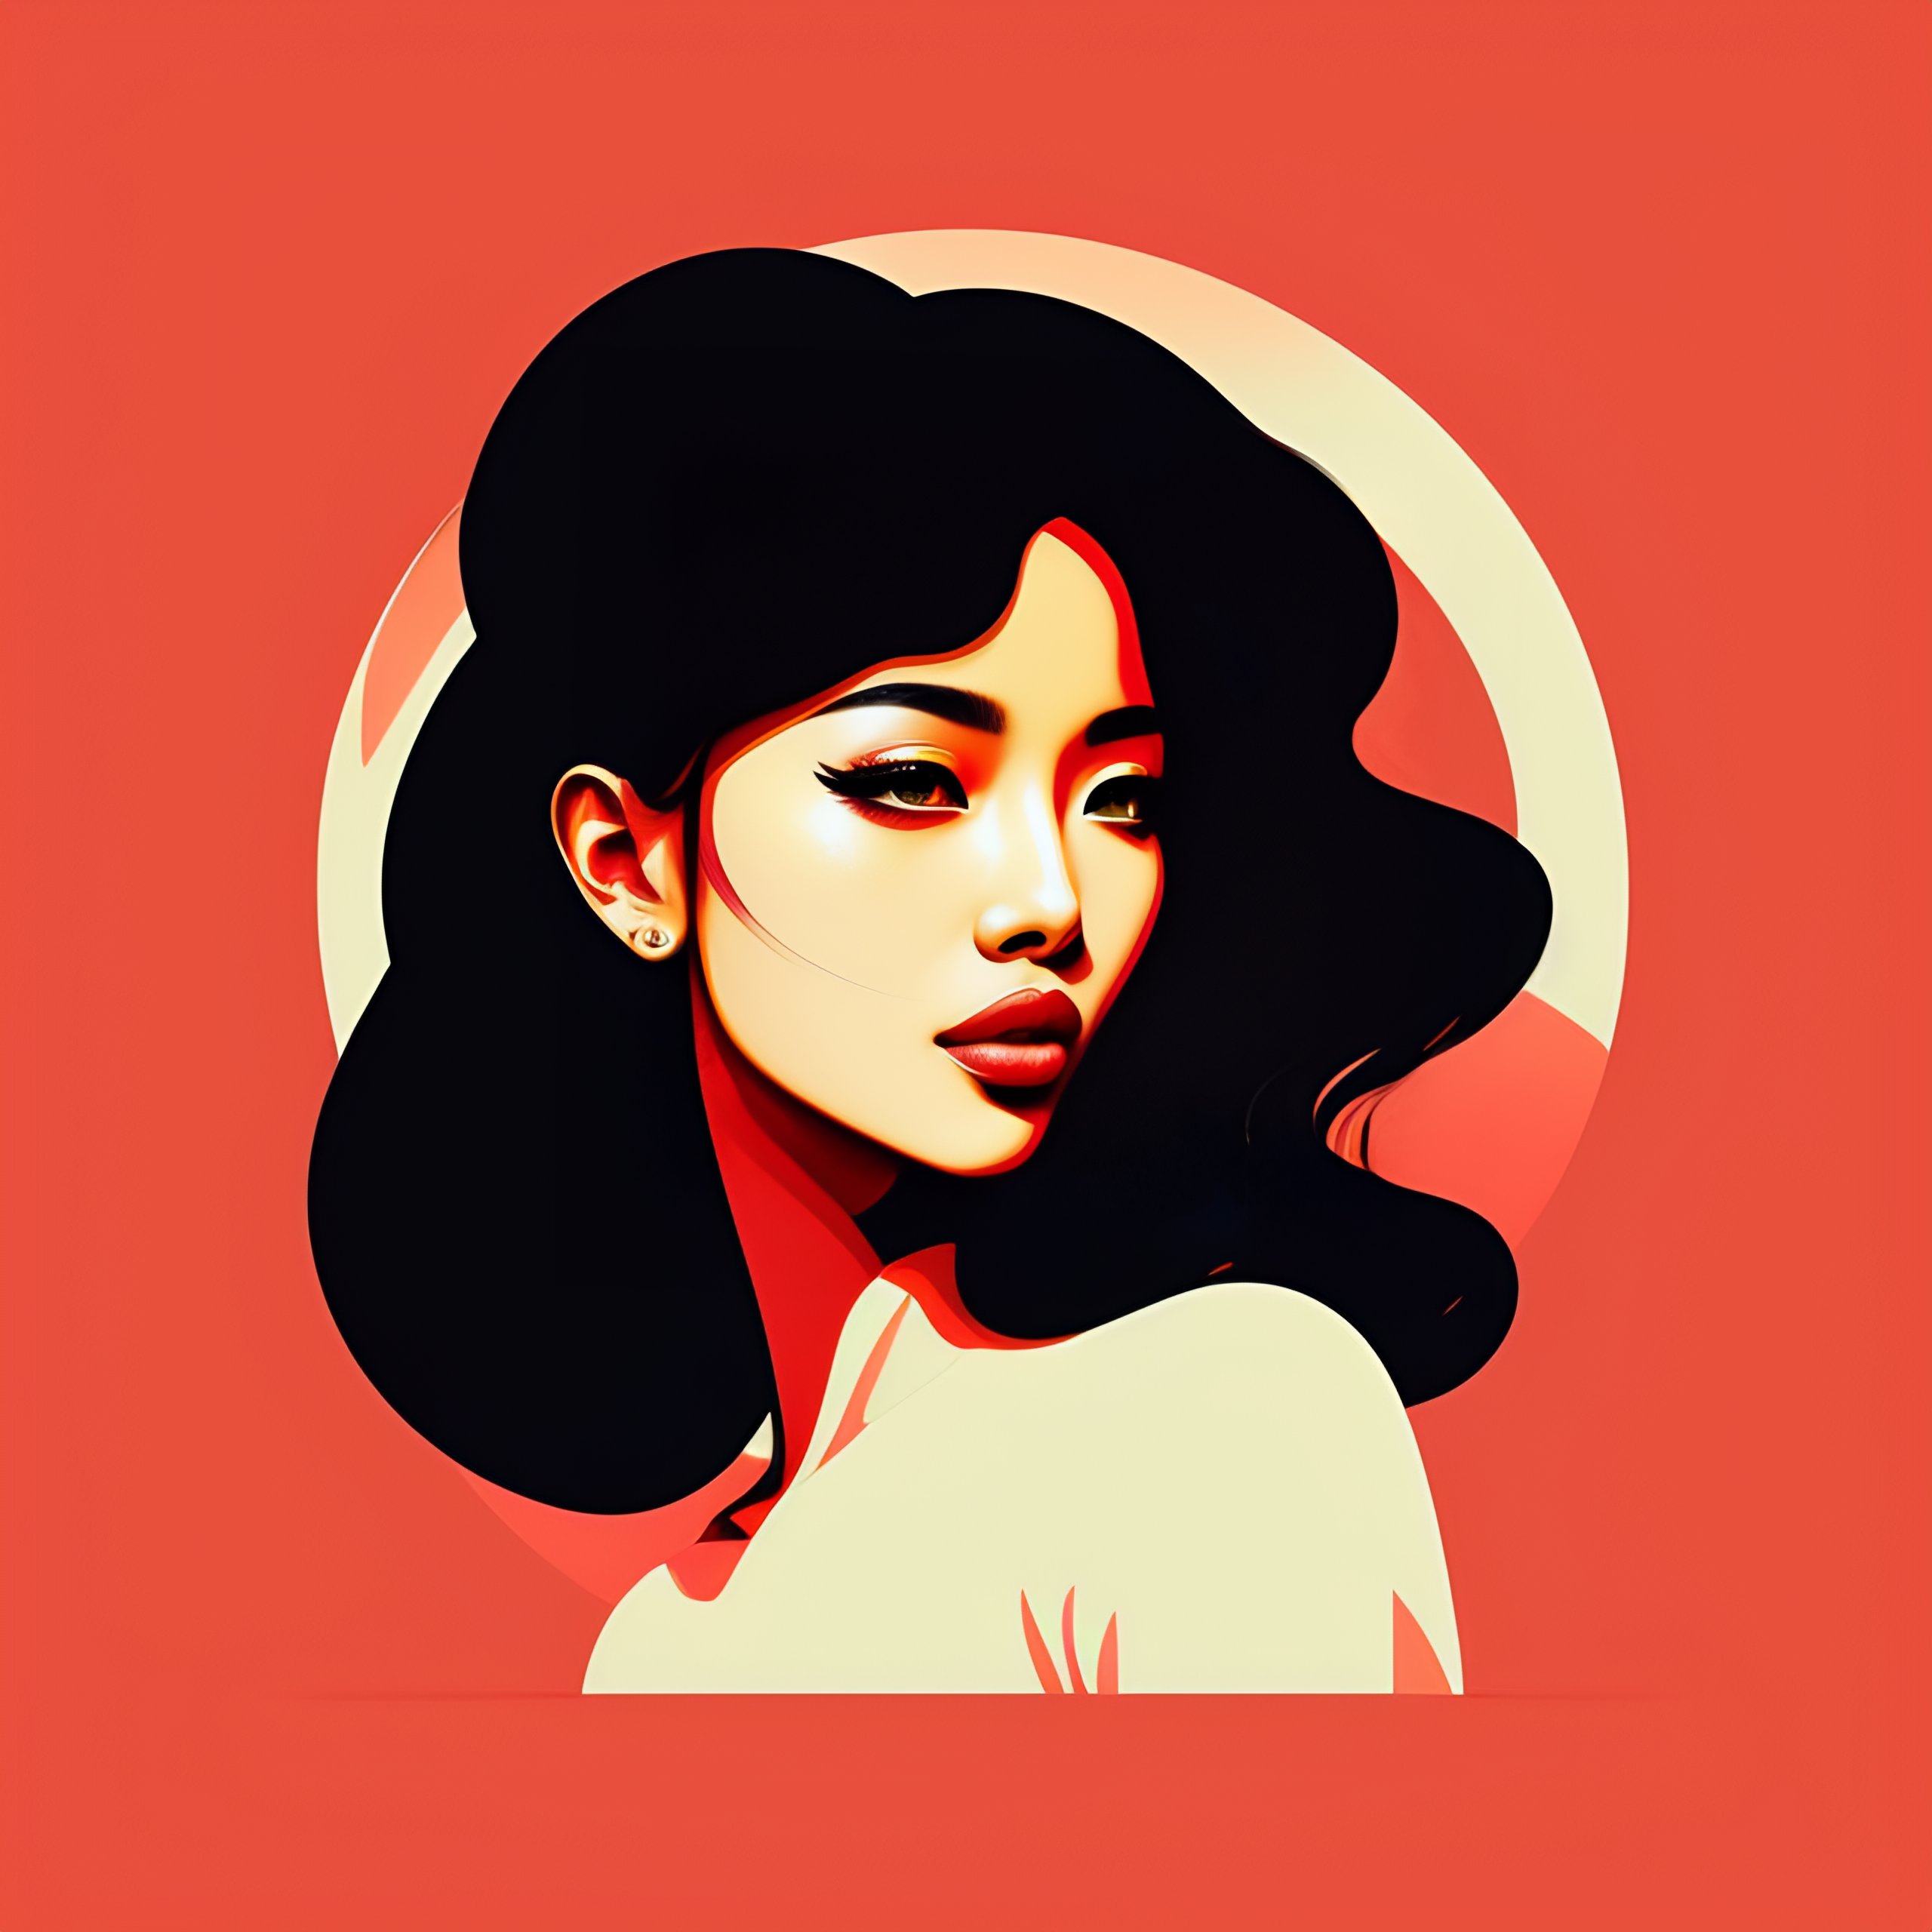 Lexica - Minimal style, art lines, two colors, 2d illustration, cartoon.